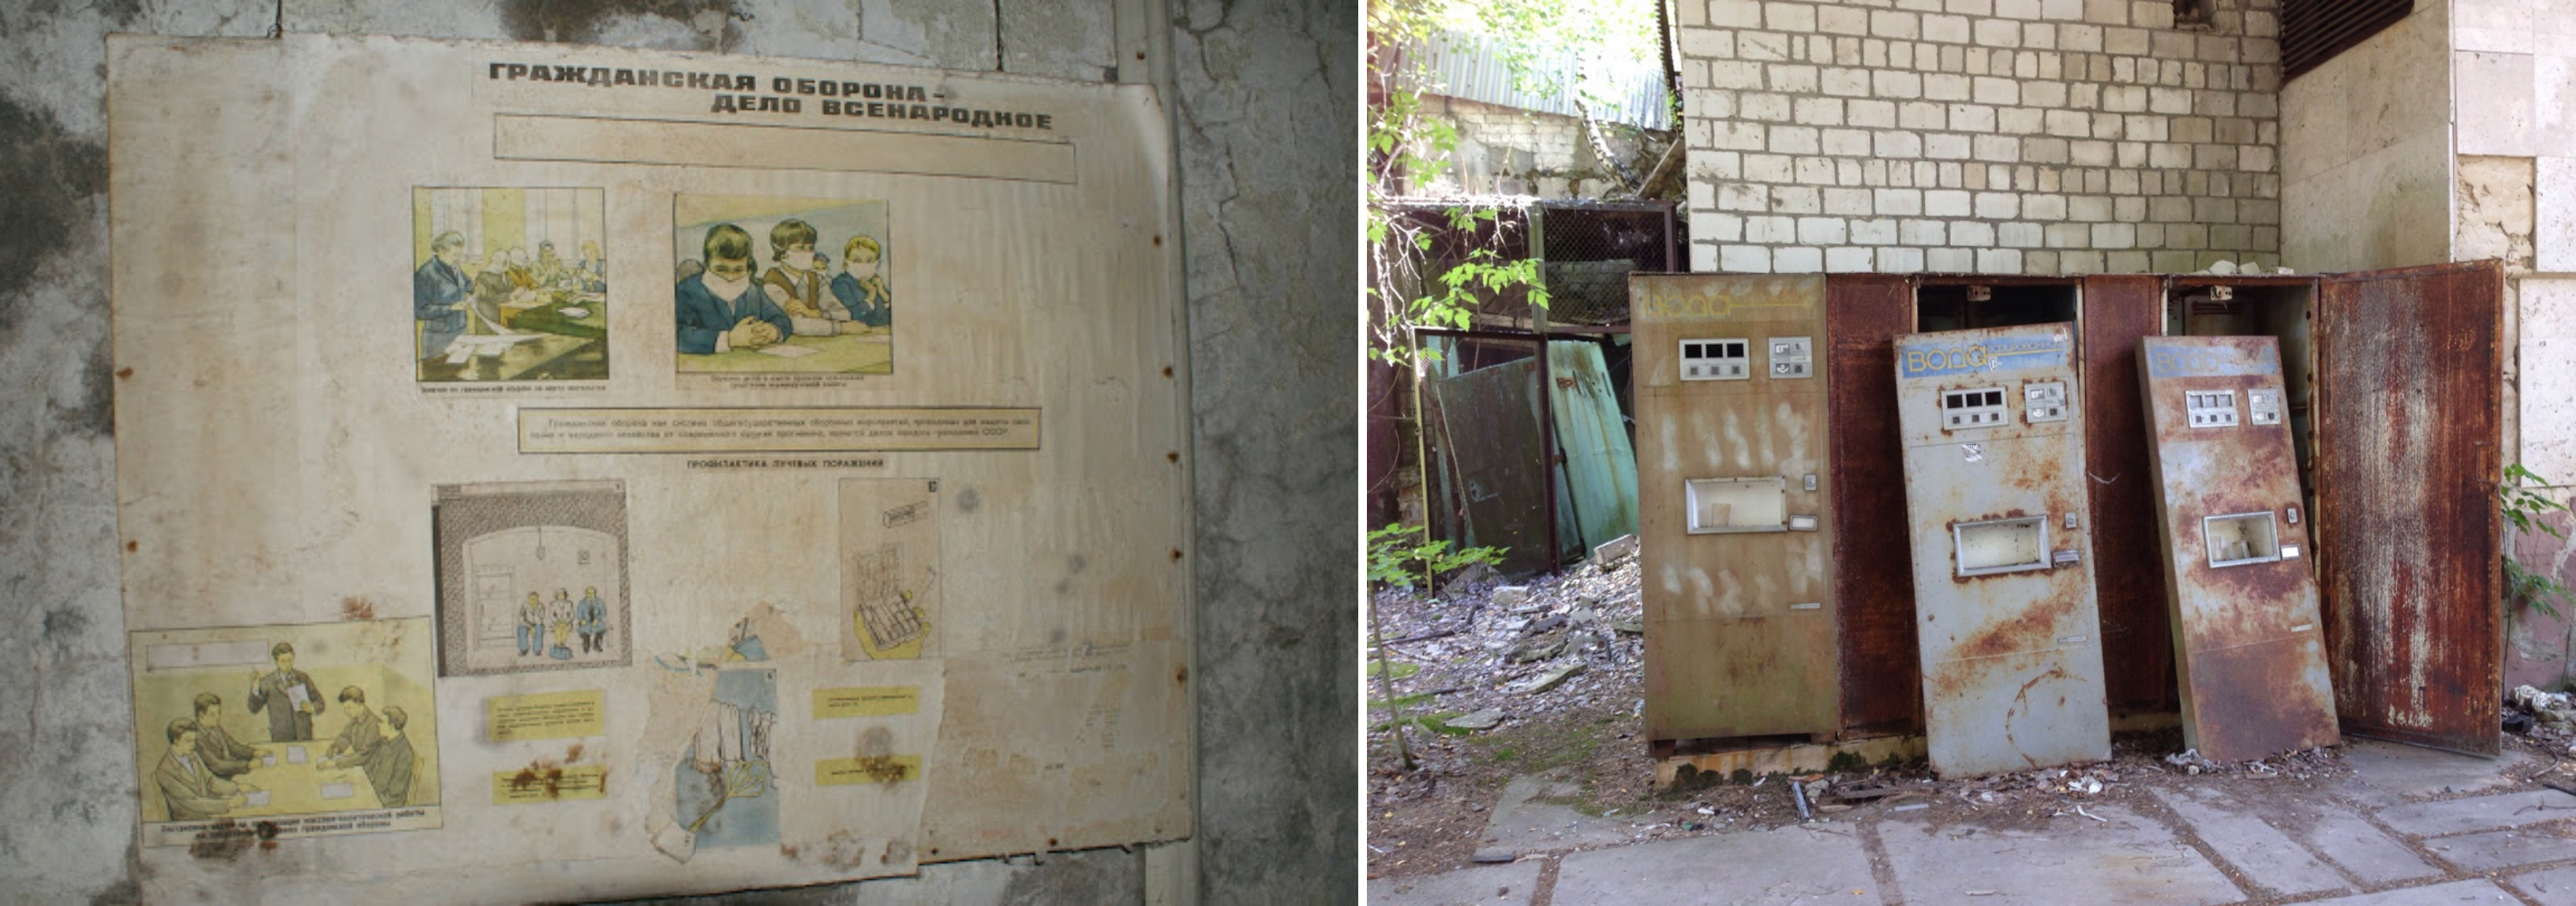 On the left, poster on Civil Defense in the event of a NATO nuclear attack. On the right, rusty fizzy water vending machines.